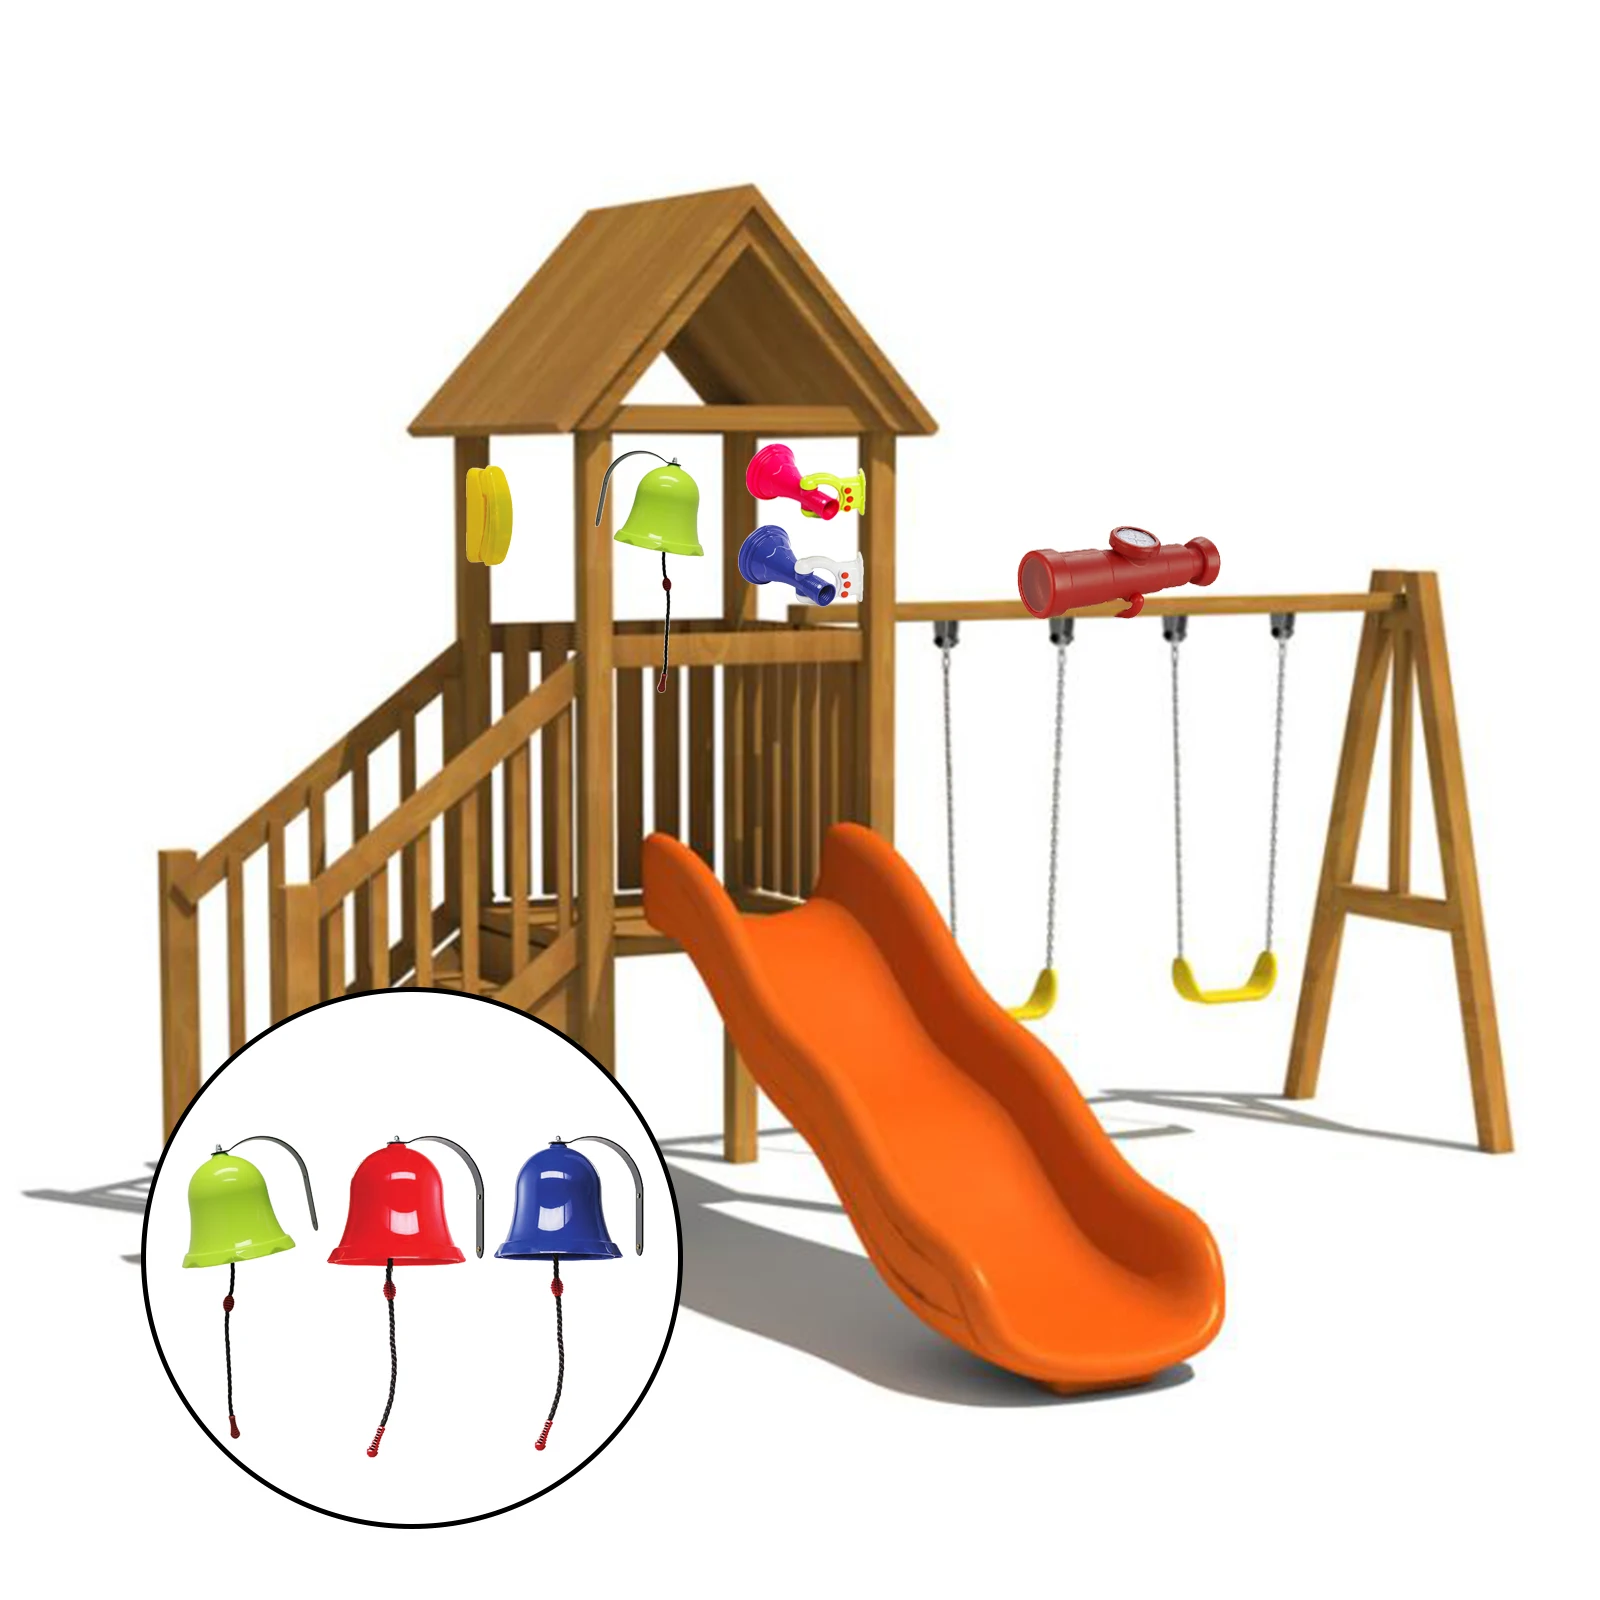 Educational Toys Bell Playground Hanging Bell Swing Set Accessory Plastic for Outdoor Wooden Swing Set Ages 3+